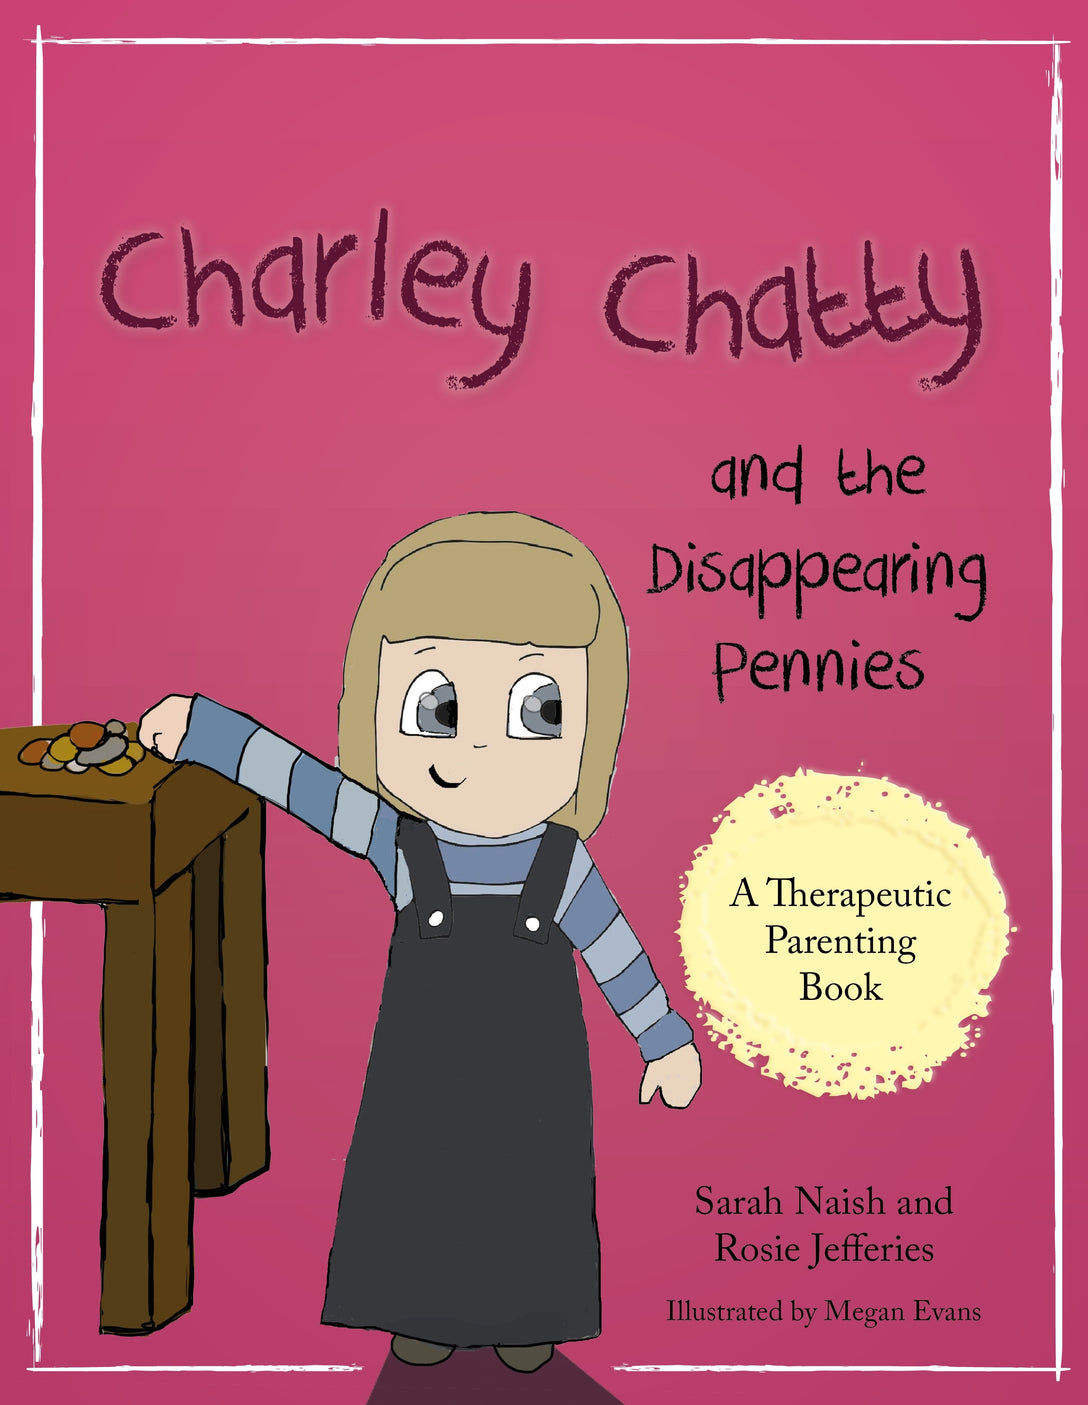 Charley Chatty and the Disappearing Pennies by Megan Evans, Rosie Jefferies, Sarah Naish